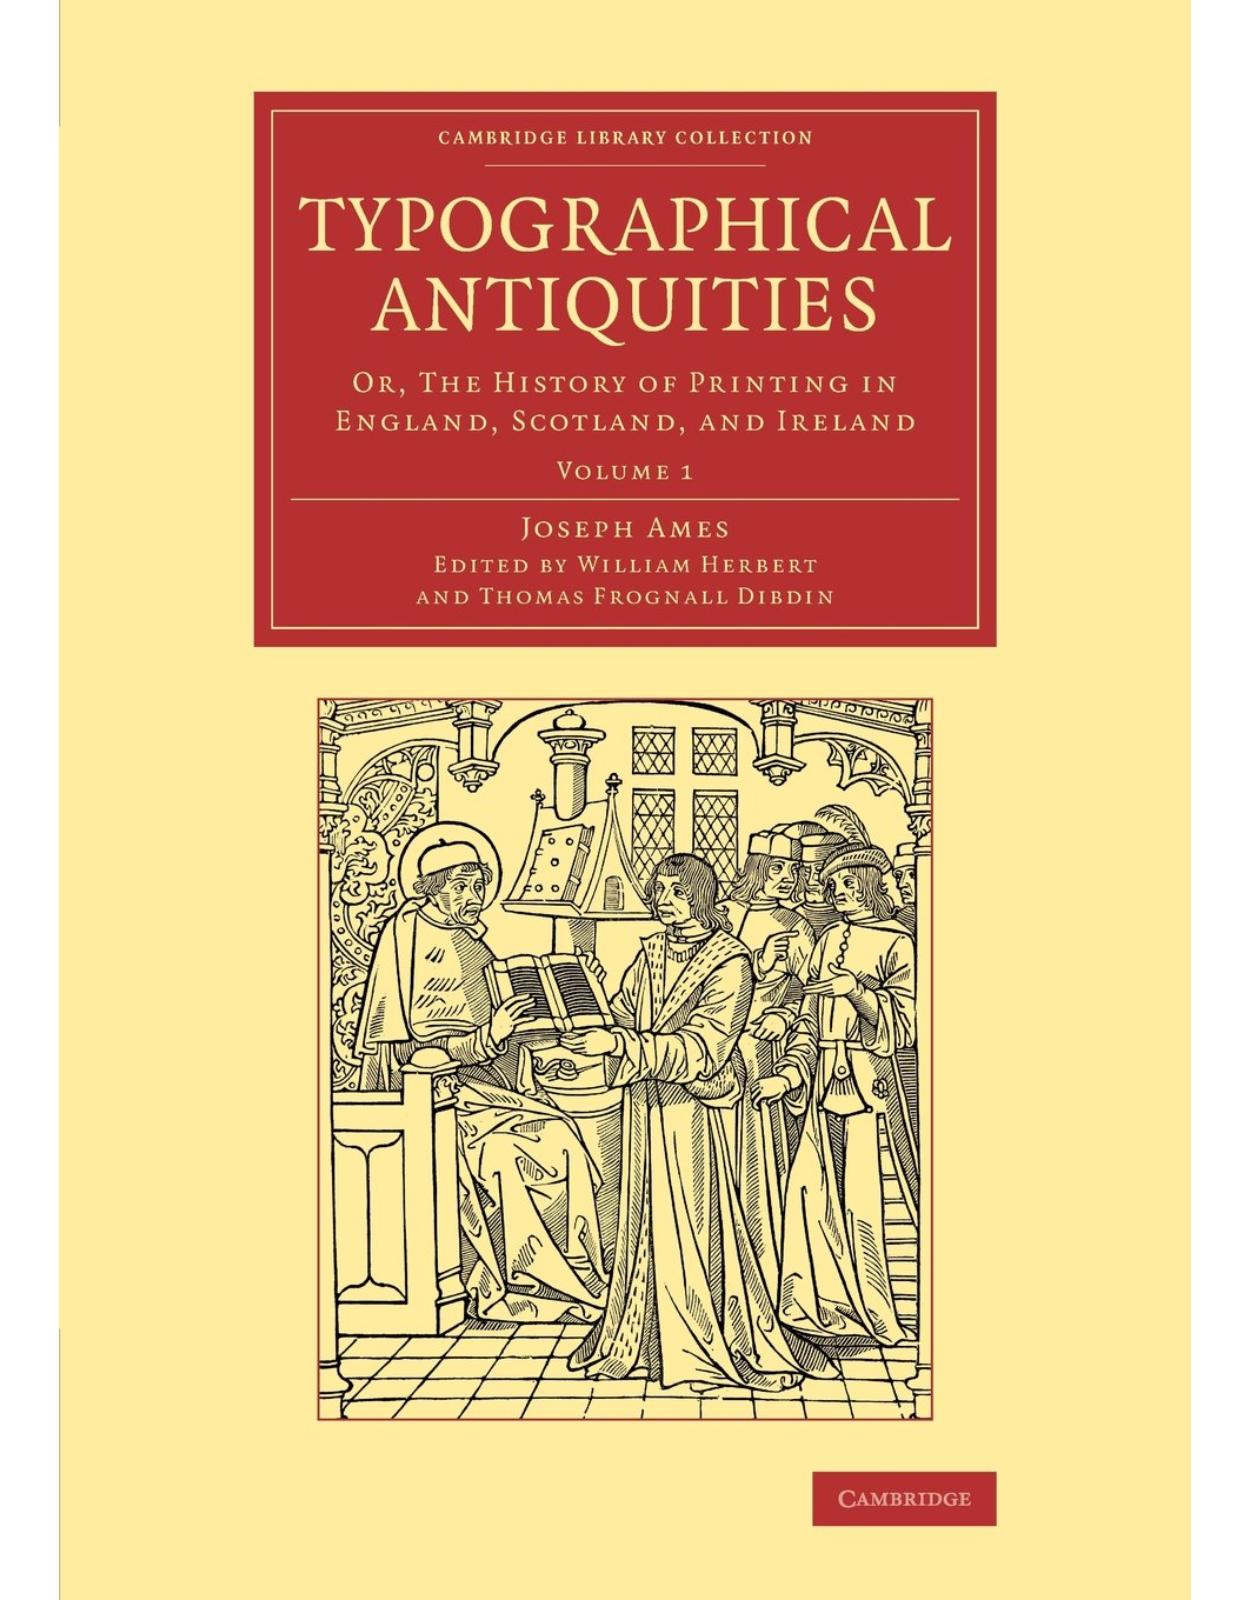 Typographical Antiquities 4 Volume Set: Typographical Antiquities: Or, The History of Printing in England, Scotland, and Ireland: Volume 1 (Cambridge ... of Printing, Publishing and Libraries)